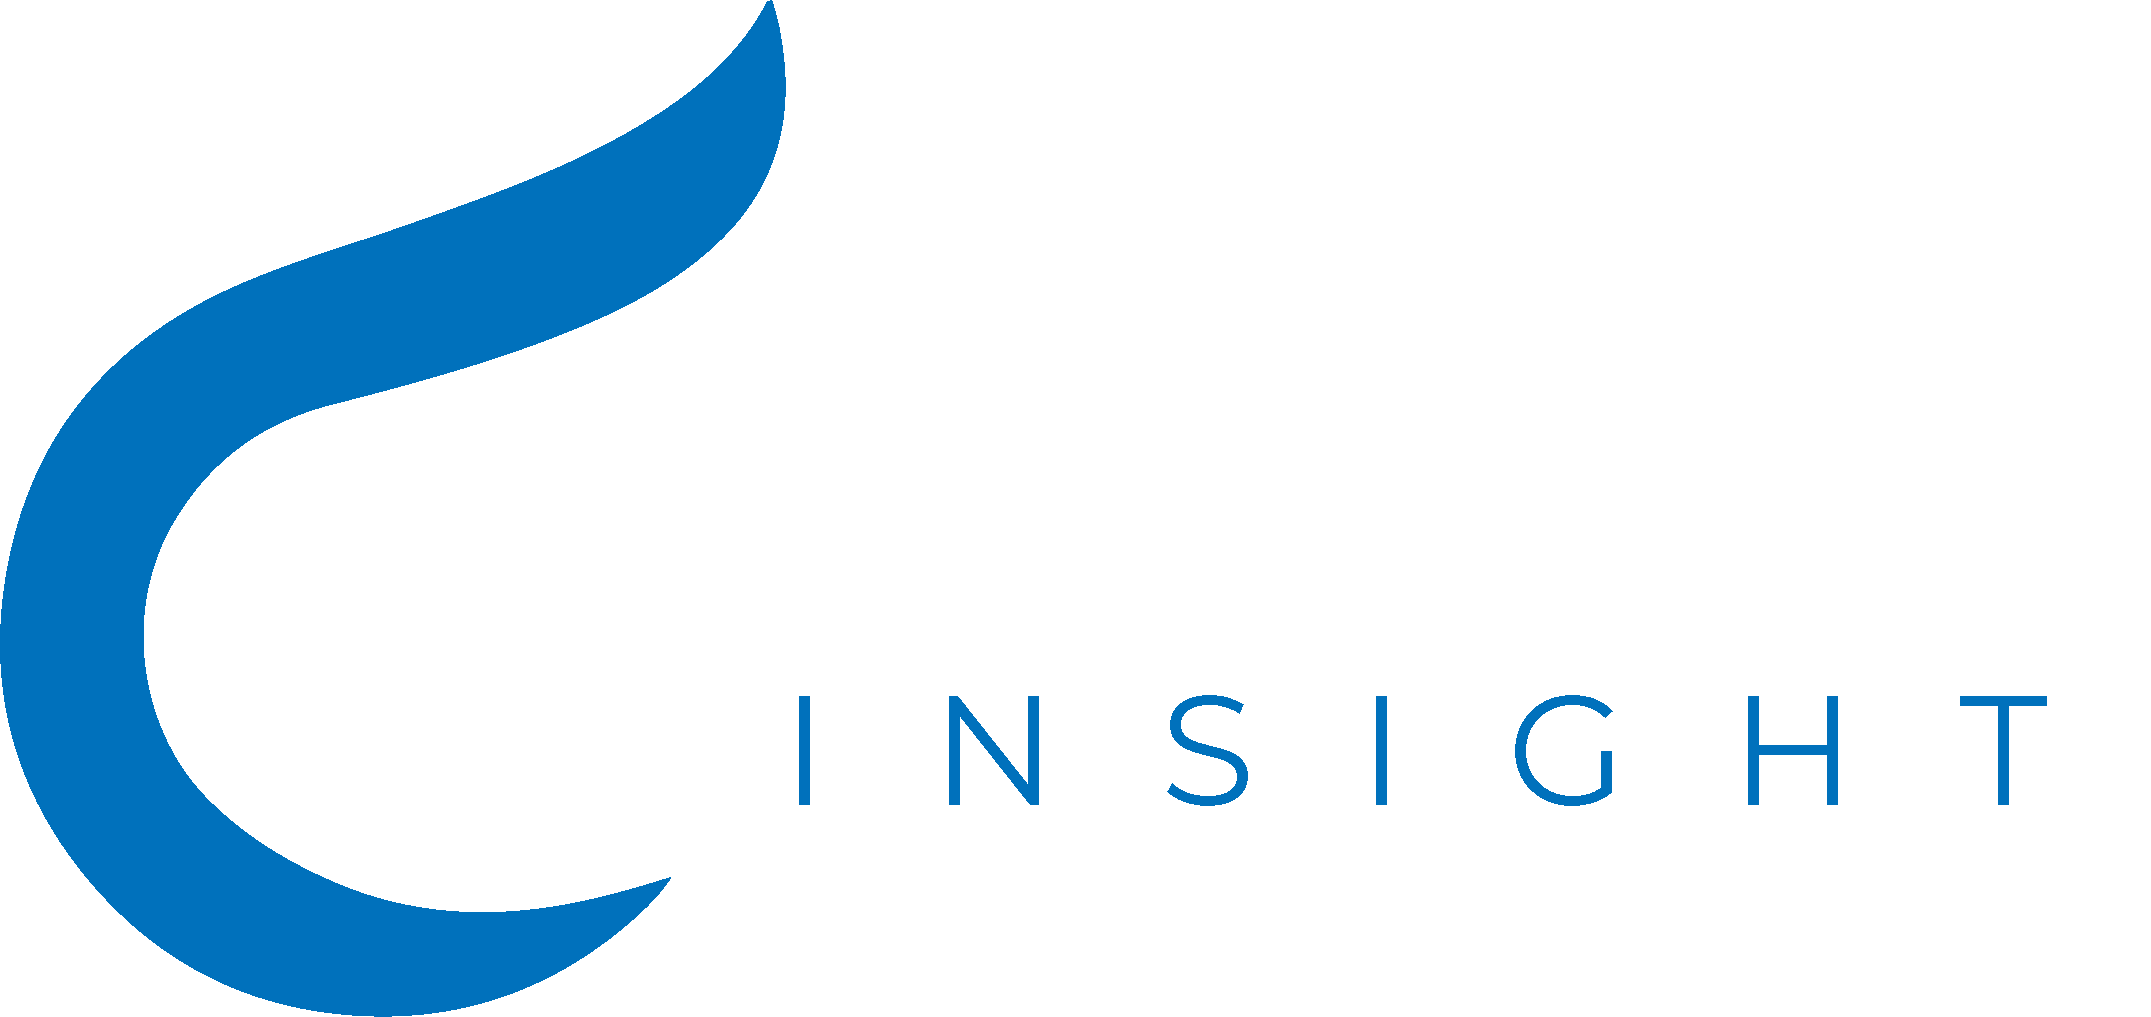 The Climate Insight